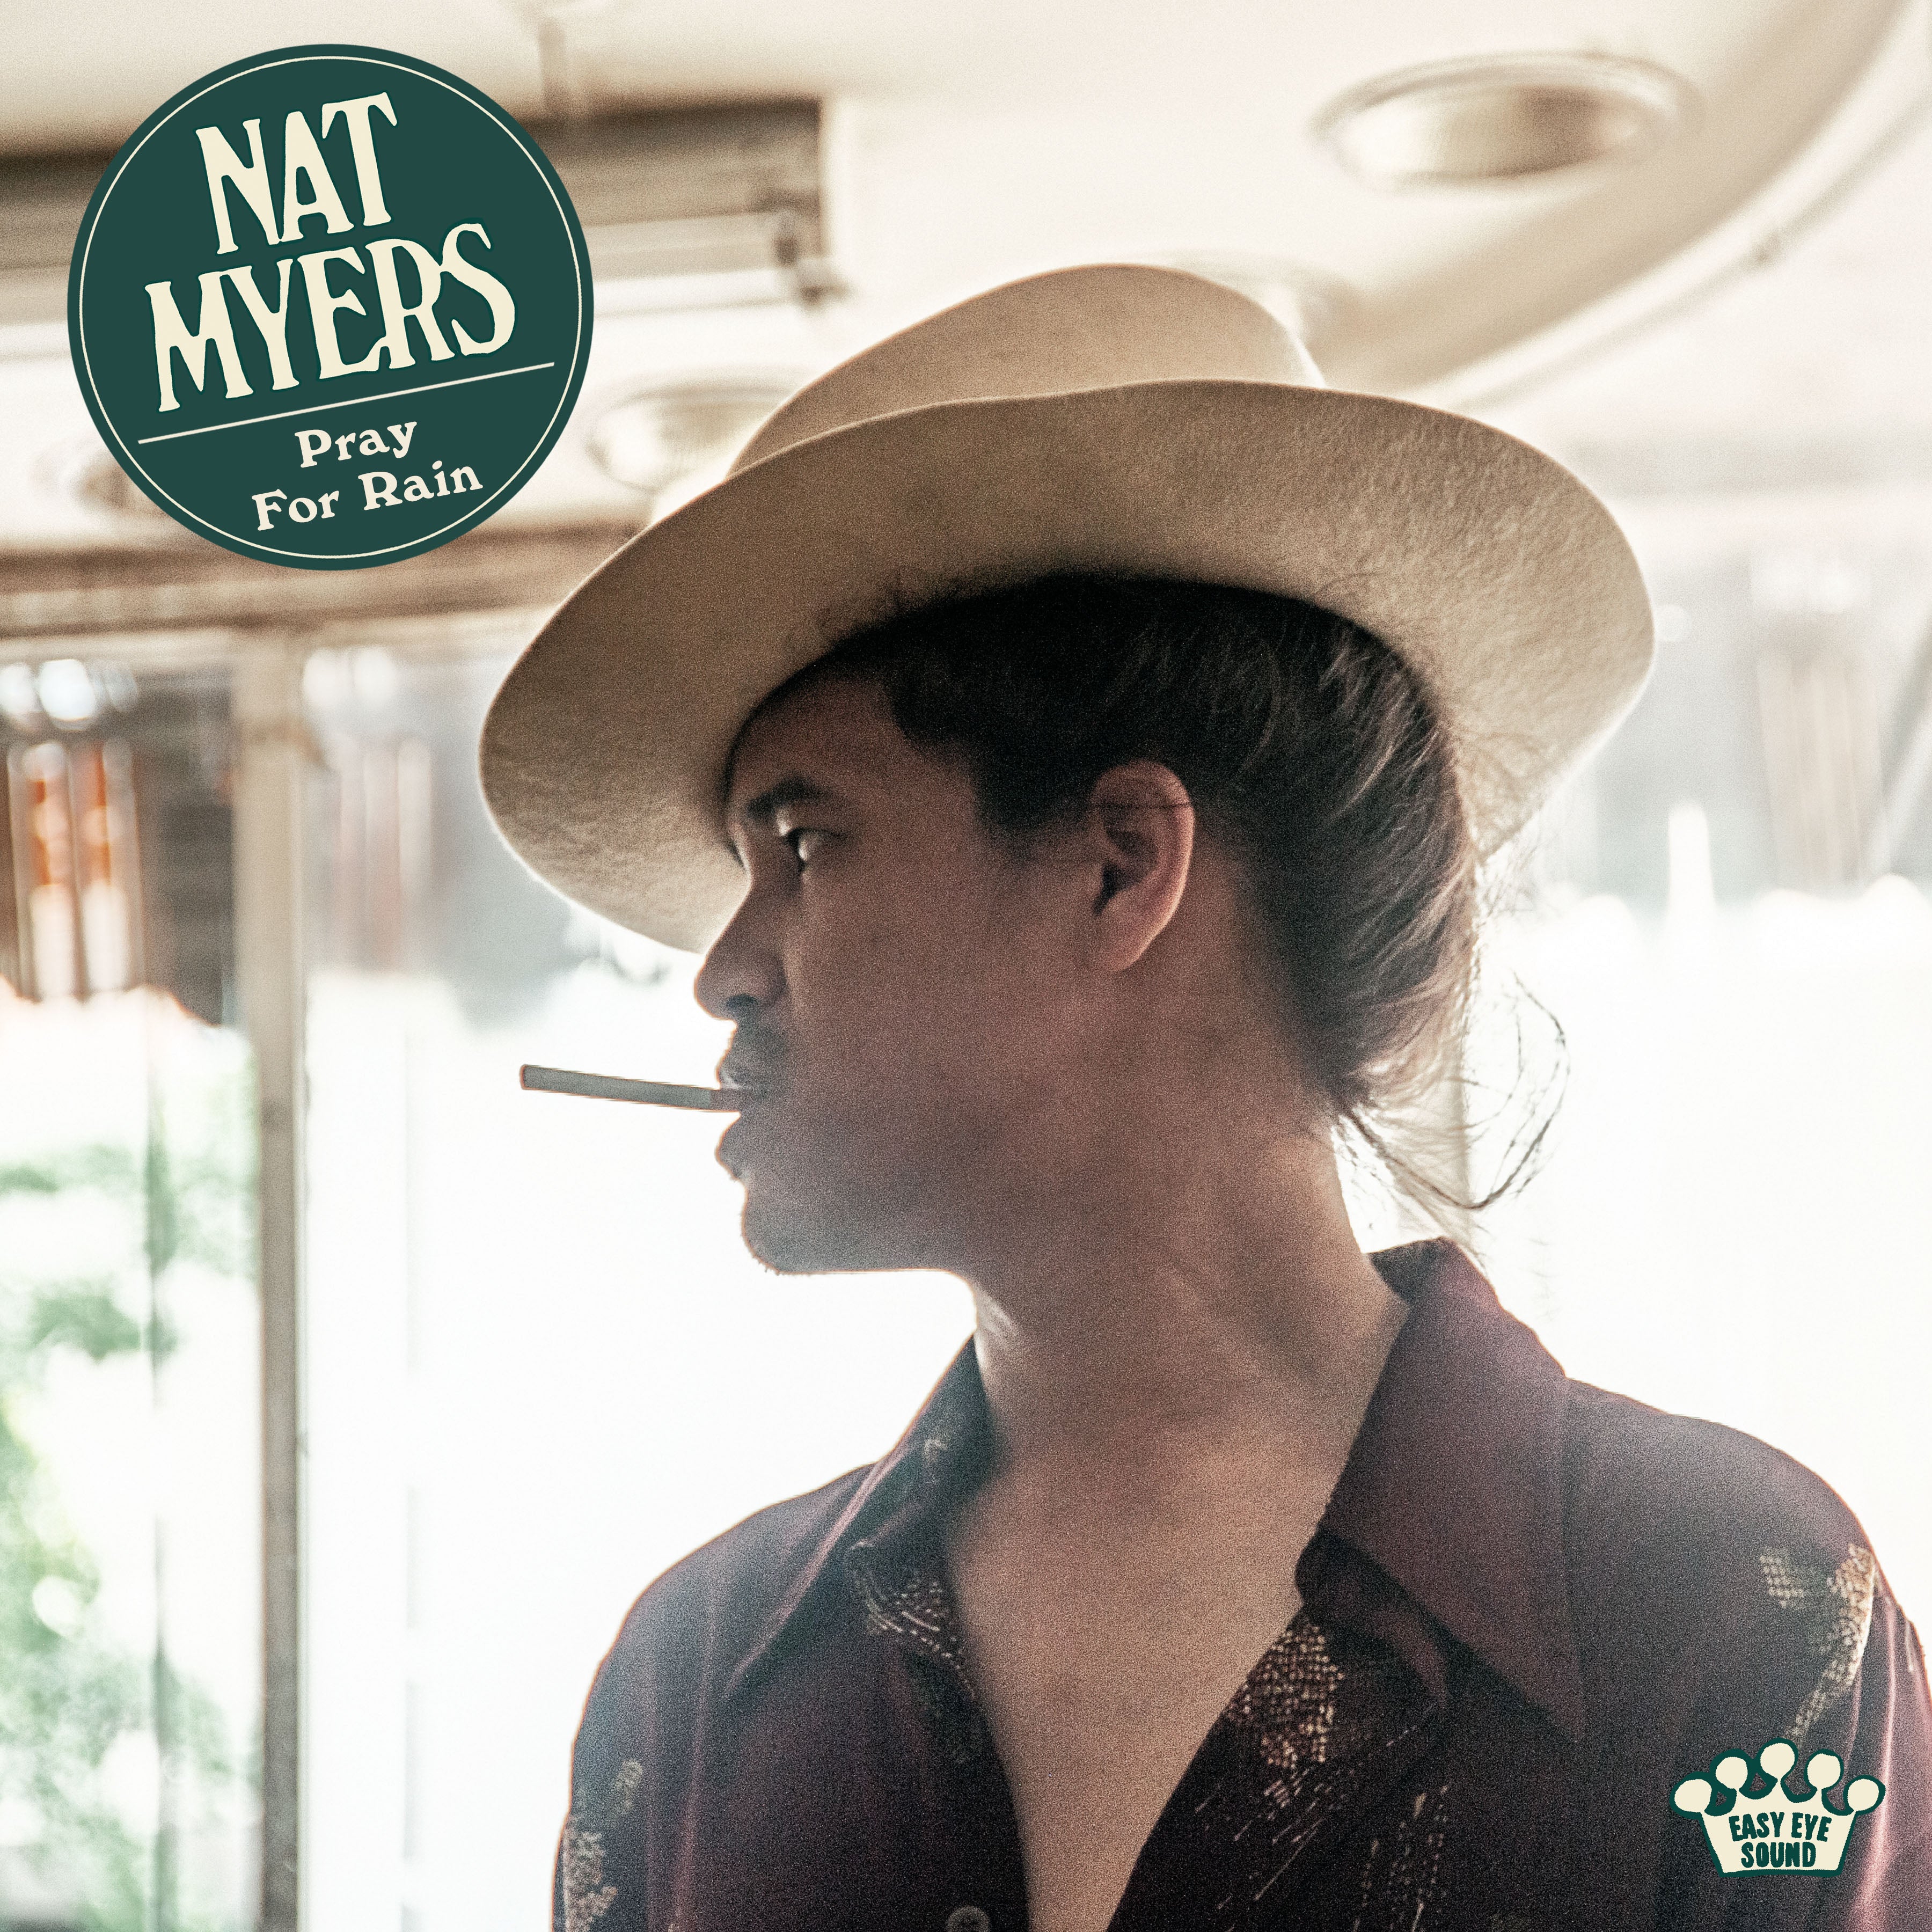 Listen to "Pray For Rain" by Nat Myers!